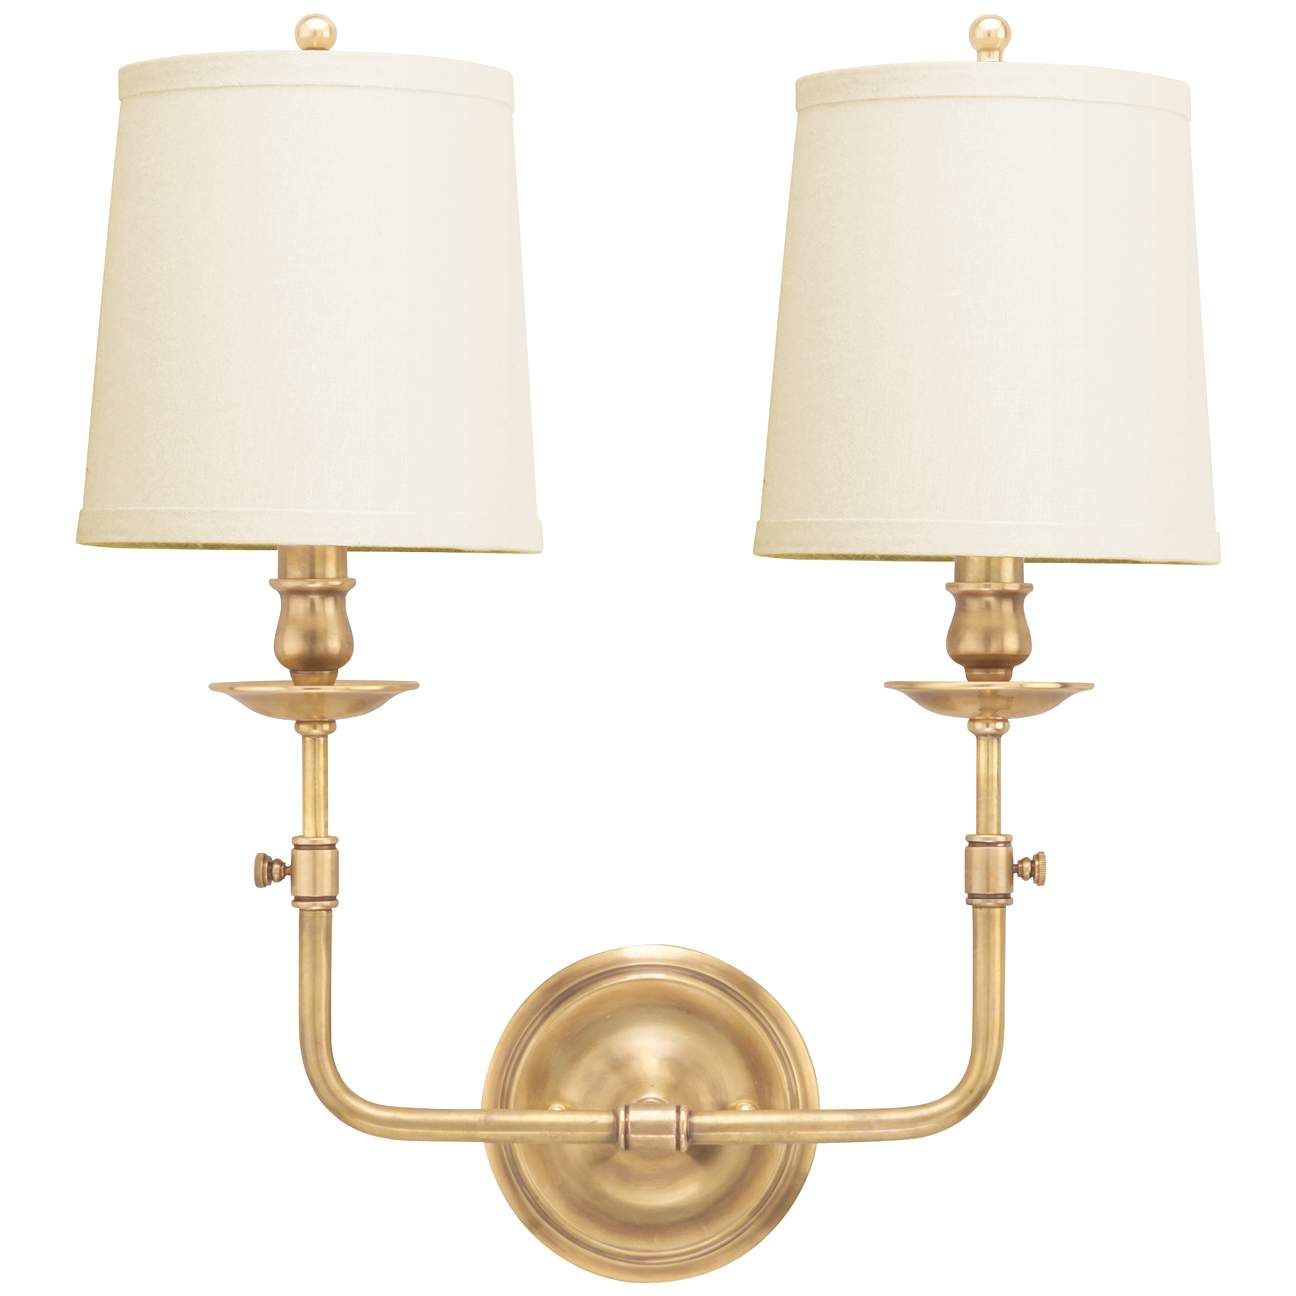 Hudson Valley Logan Adjustable Height 2-Light Aged Brass Wall Sconce - #374G2 | Lamps Plus | Lamps Plus